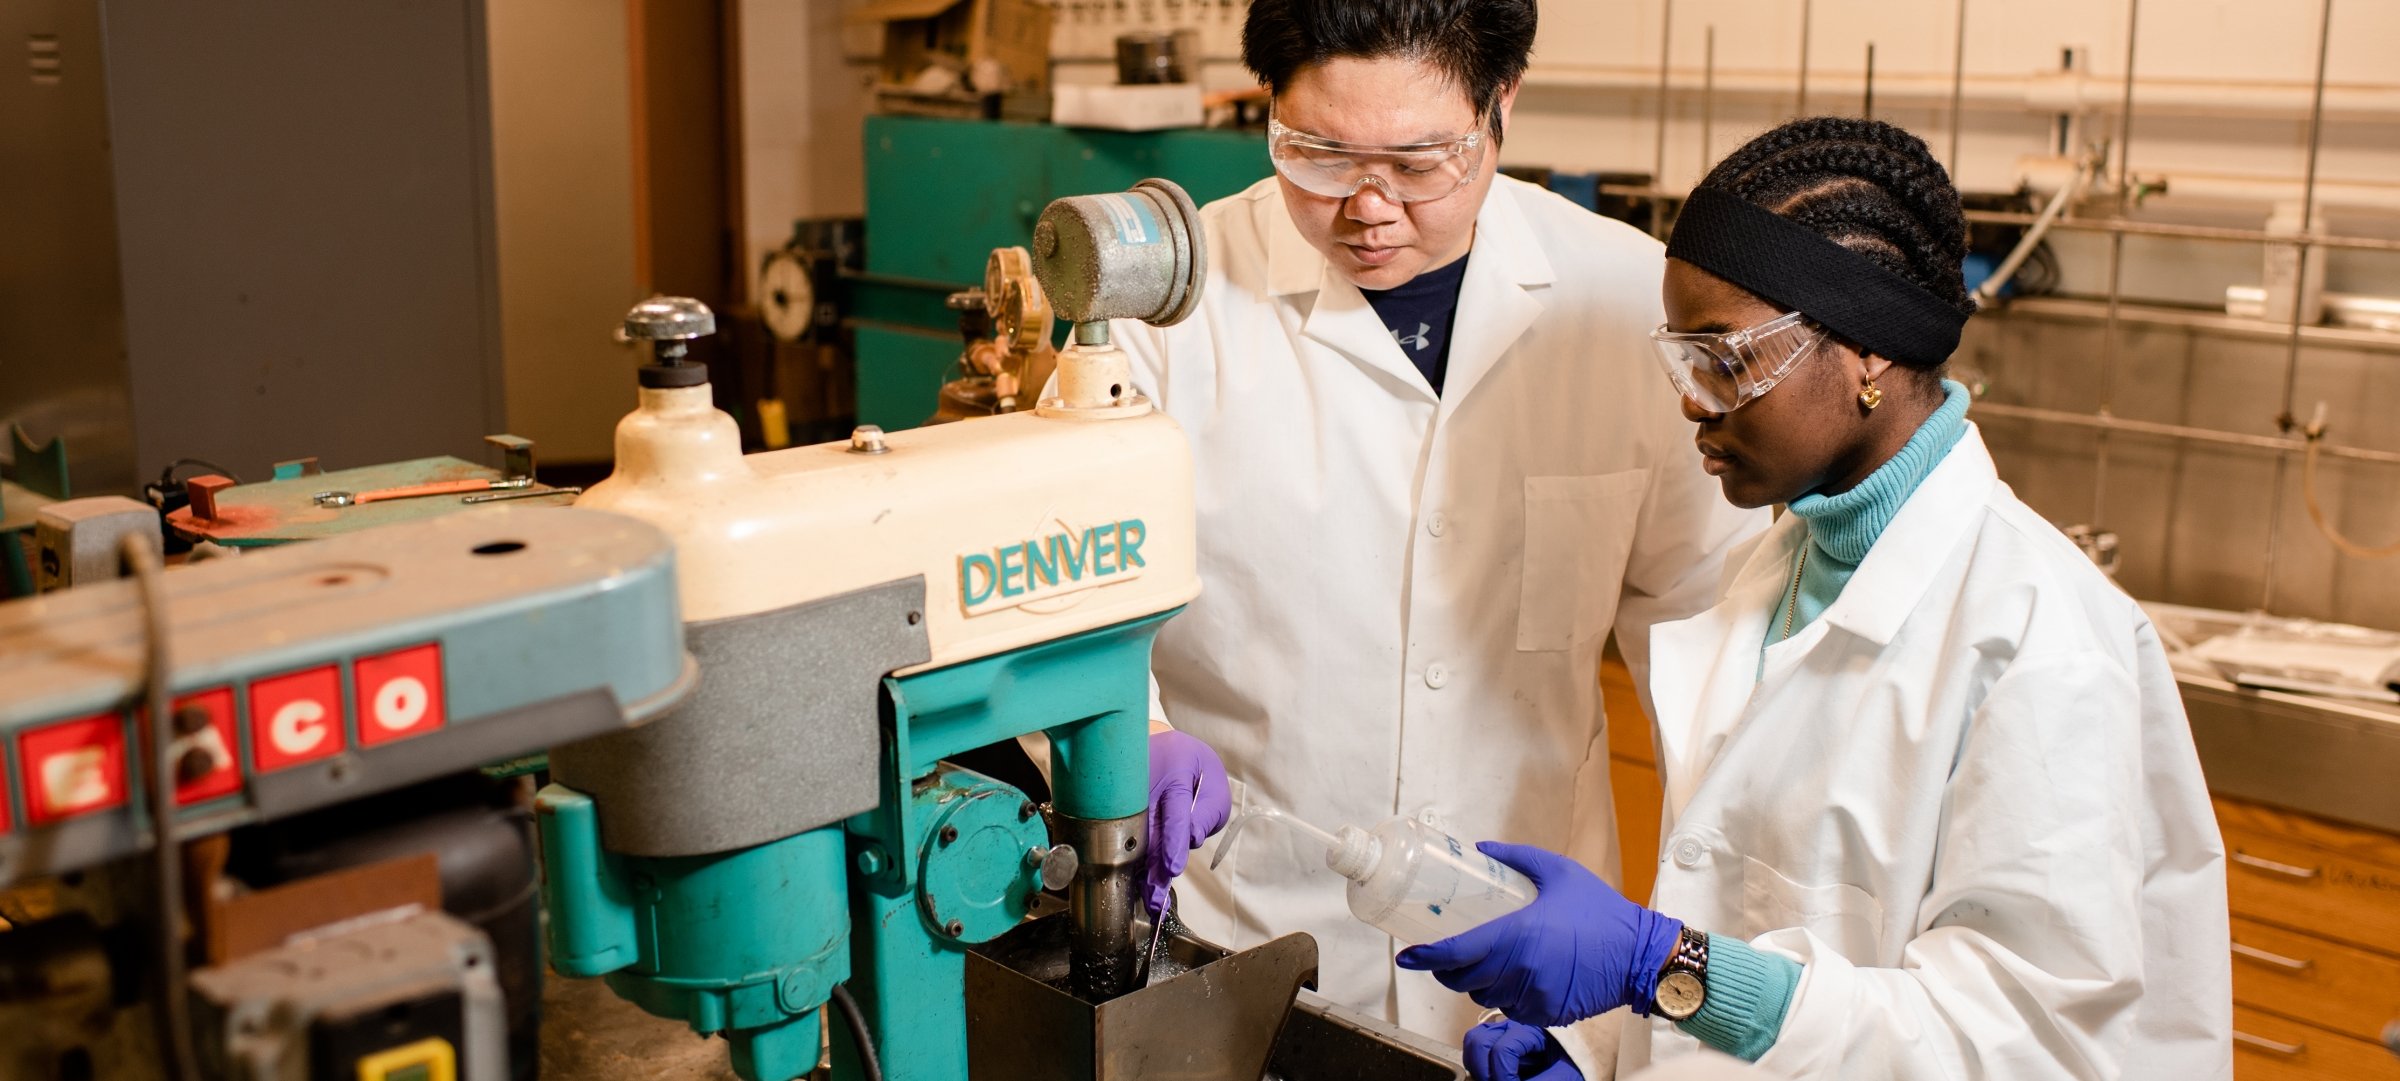 A black woman student with braided hair holds a fluid filled bottle next to a machine while an asian faculty mentor observes. Both are wearing protective eyewear.